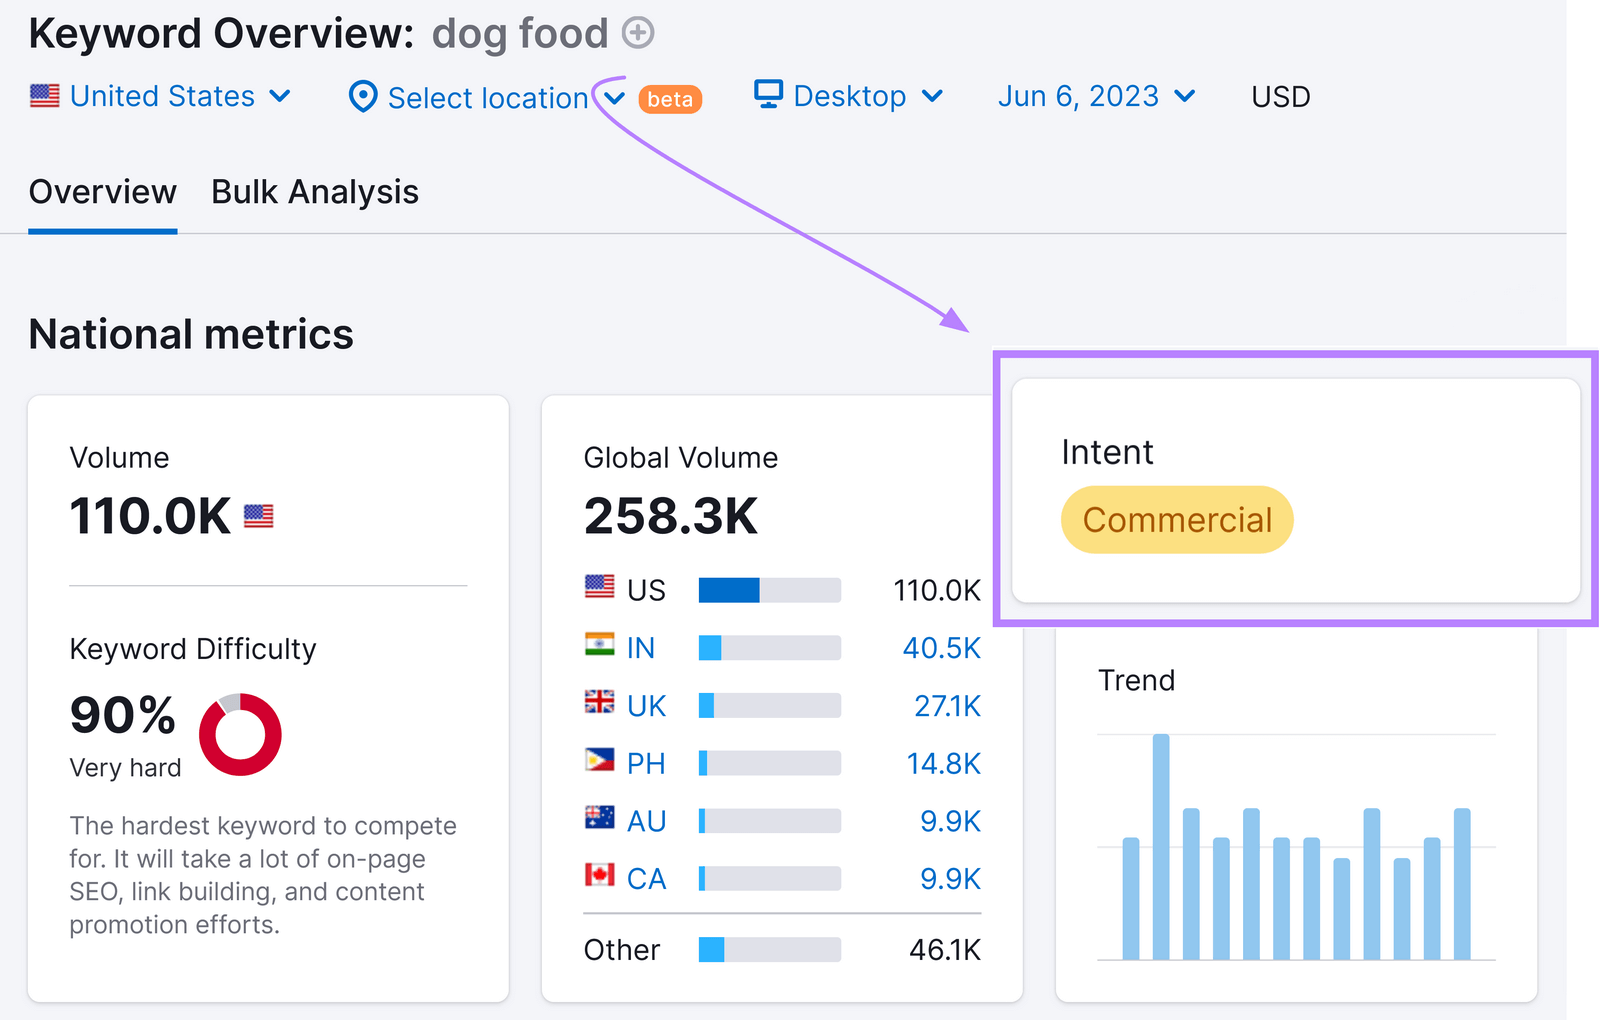 “Intent” container  displaying "commercial" intent for "dog food" keyword